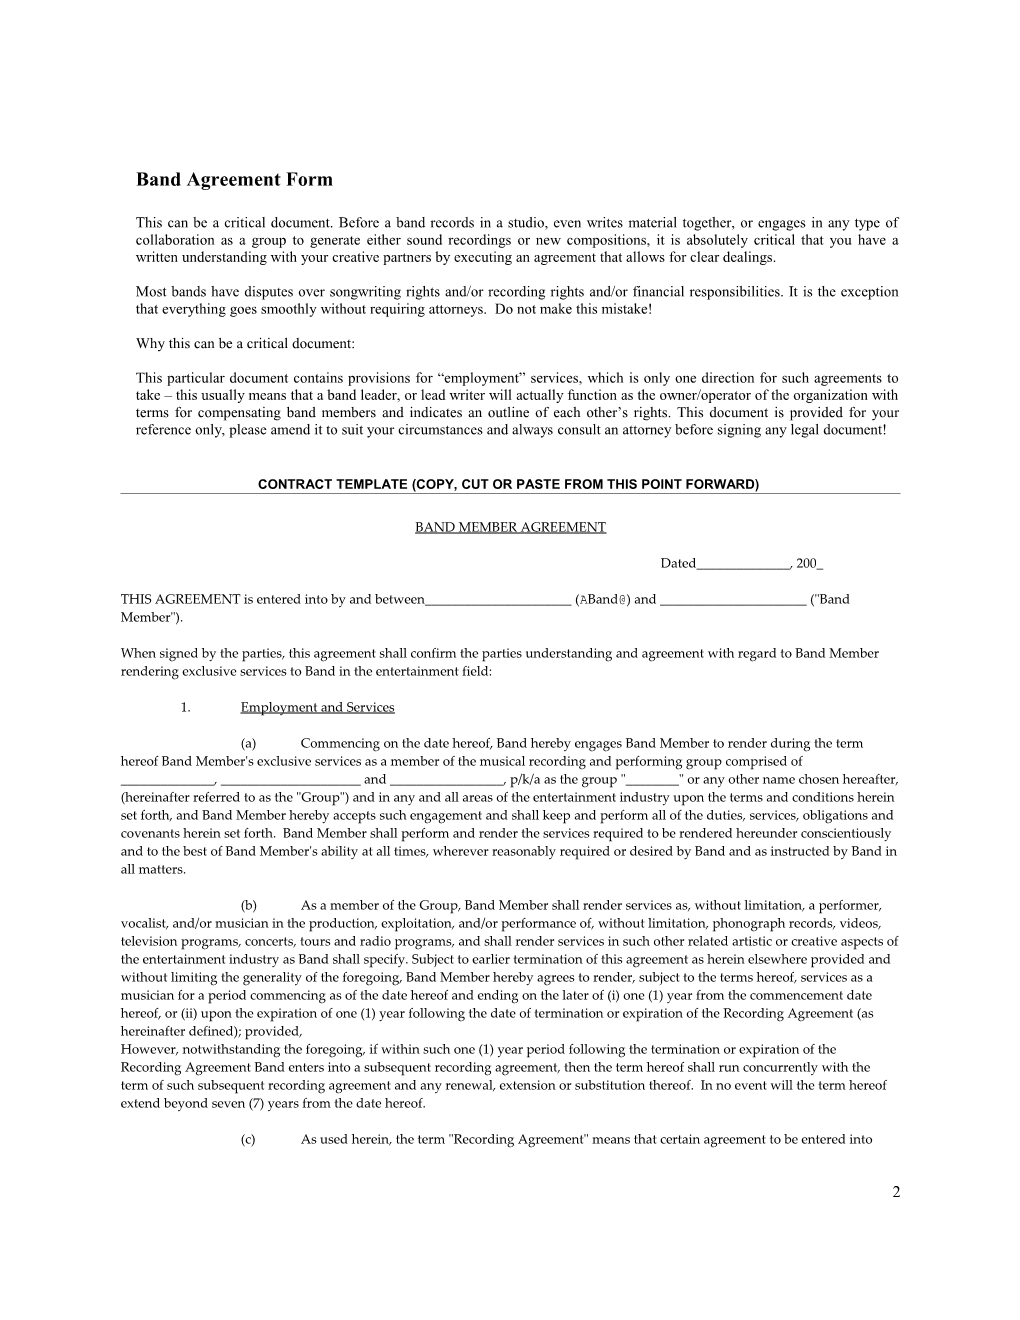 Band Agreement Form